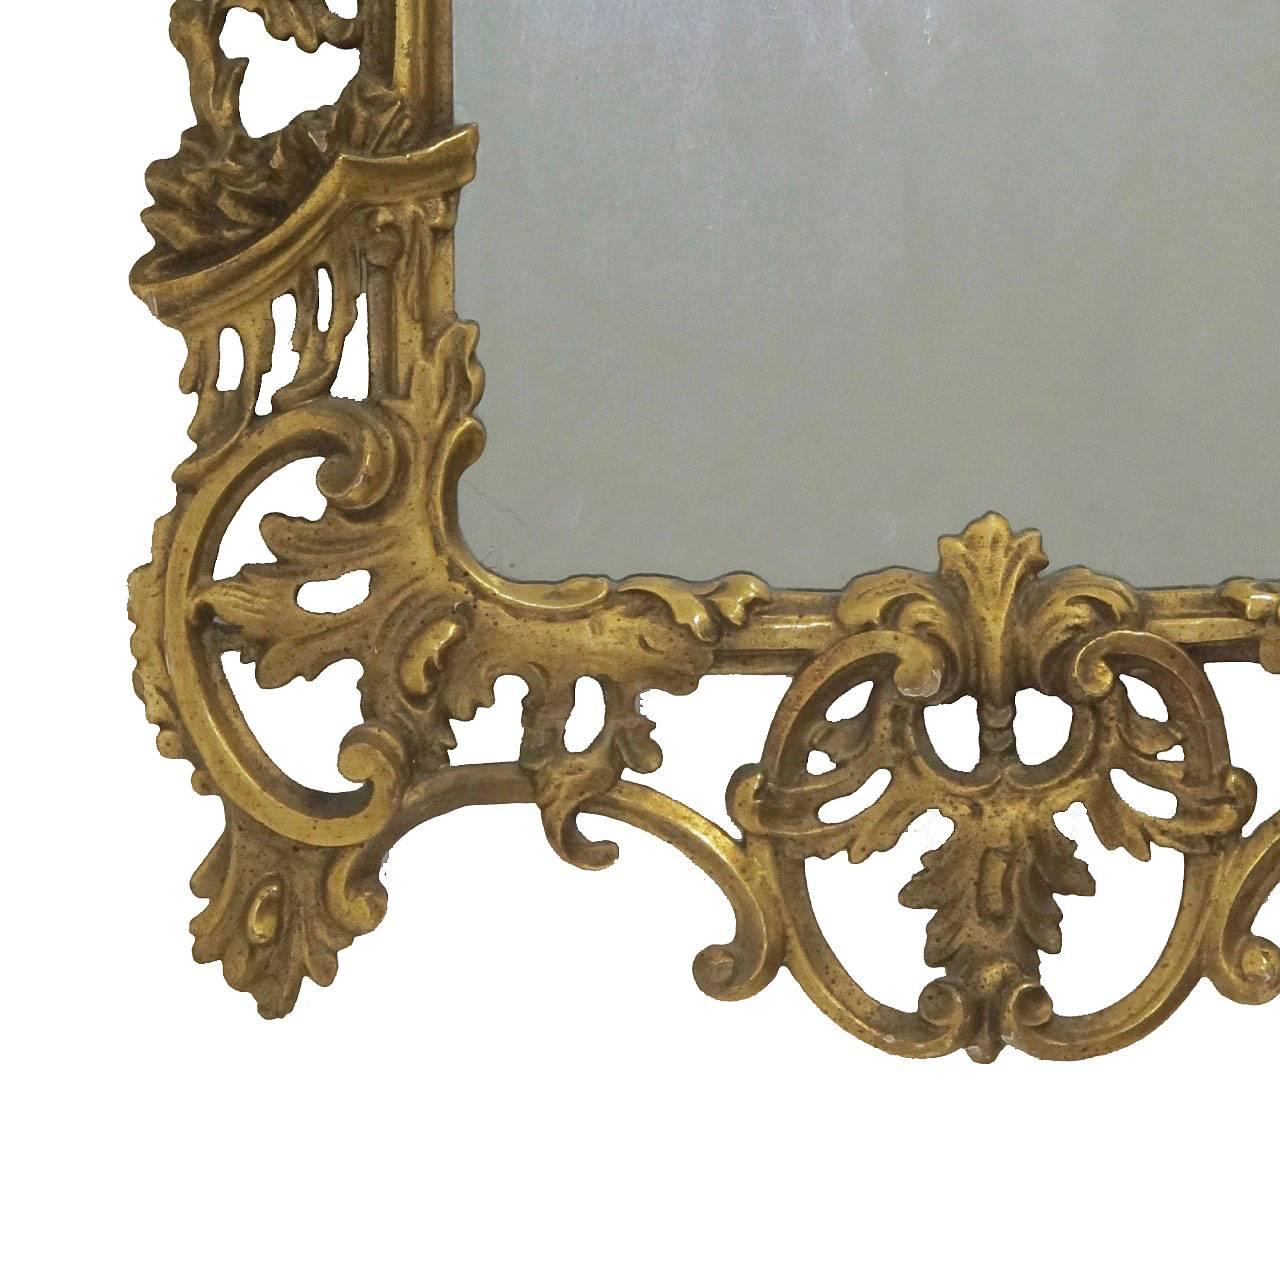 Beautifully hand-carved giltwood Rococo mirror with carved C scrolls and acanthus leaves, having its original gilt finish and original mirror plate, Italy, circa 1740.